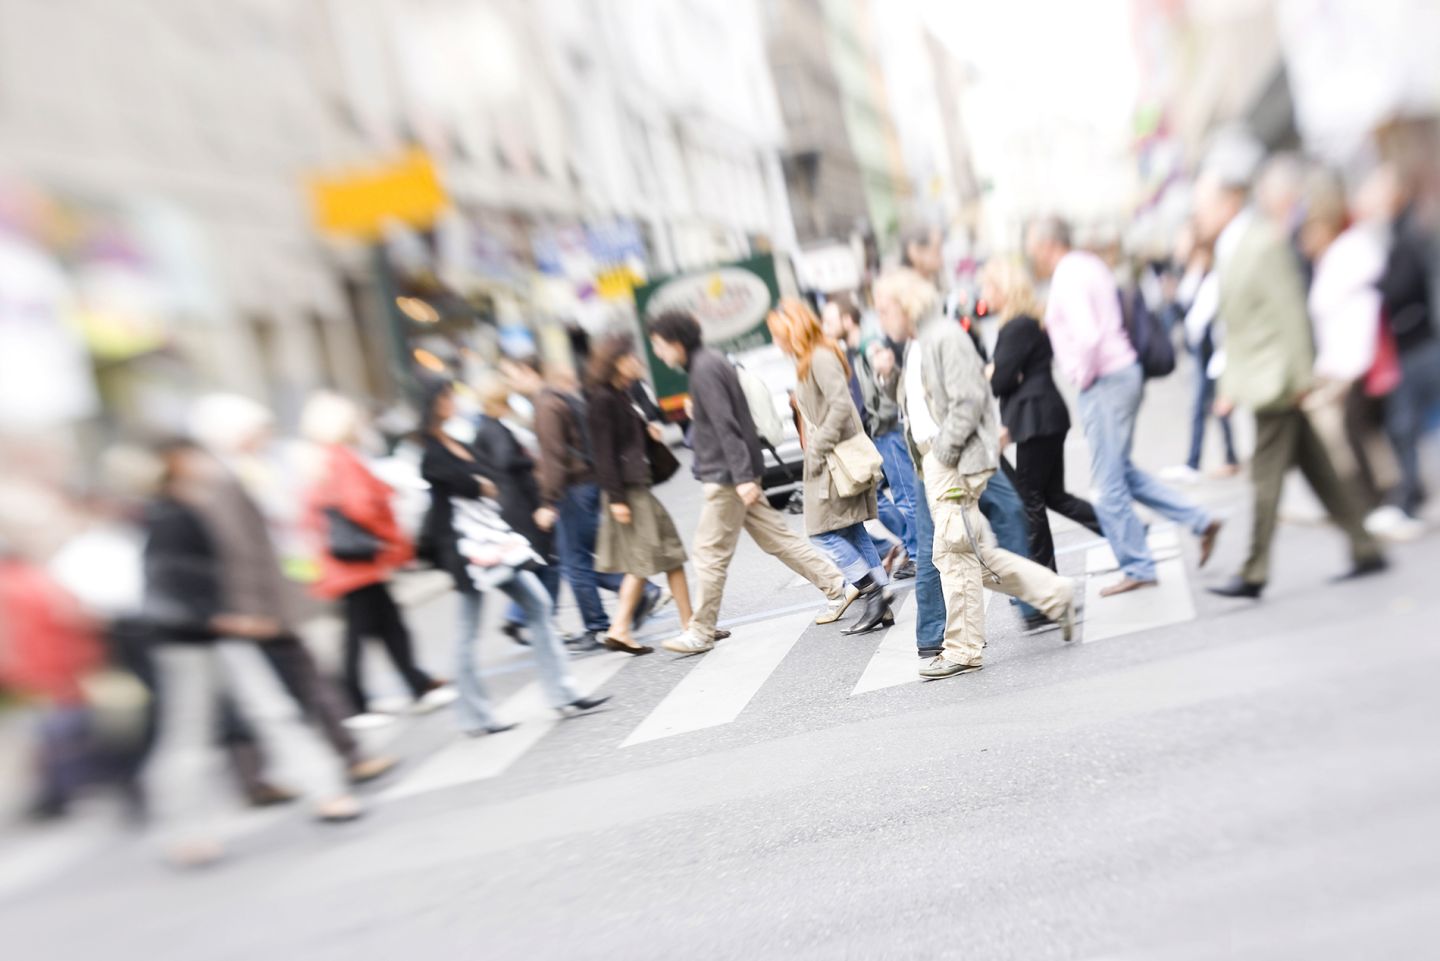 The 3 Most Important Demographics for Retailers